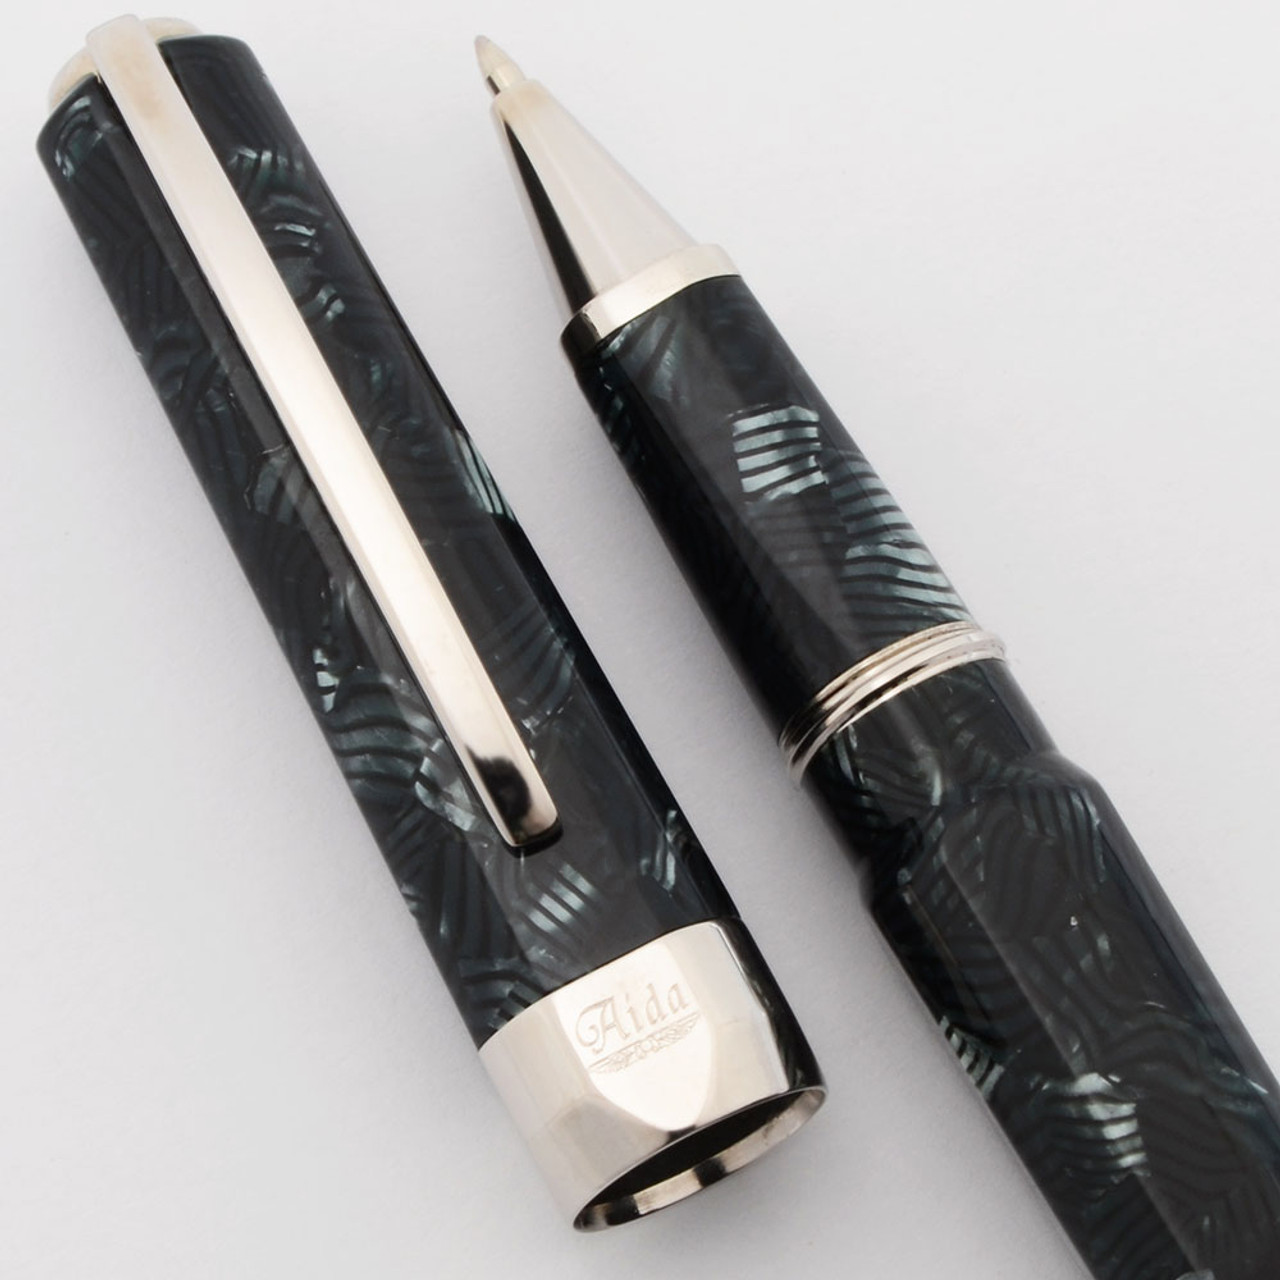 Visconti Aida Rollerball Pen (2006) - Blue Candy Stripe Celluloid, Pd Trim (Excellent, Works Well)